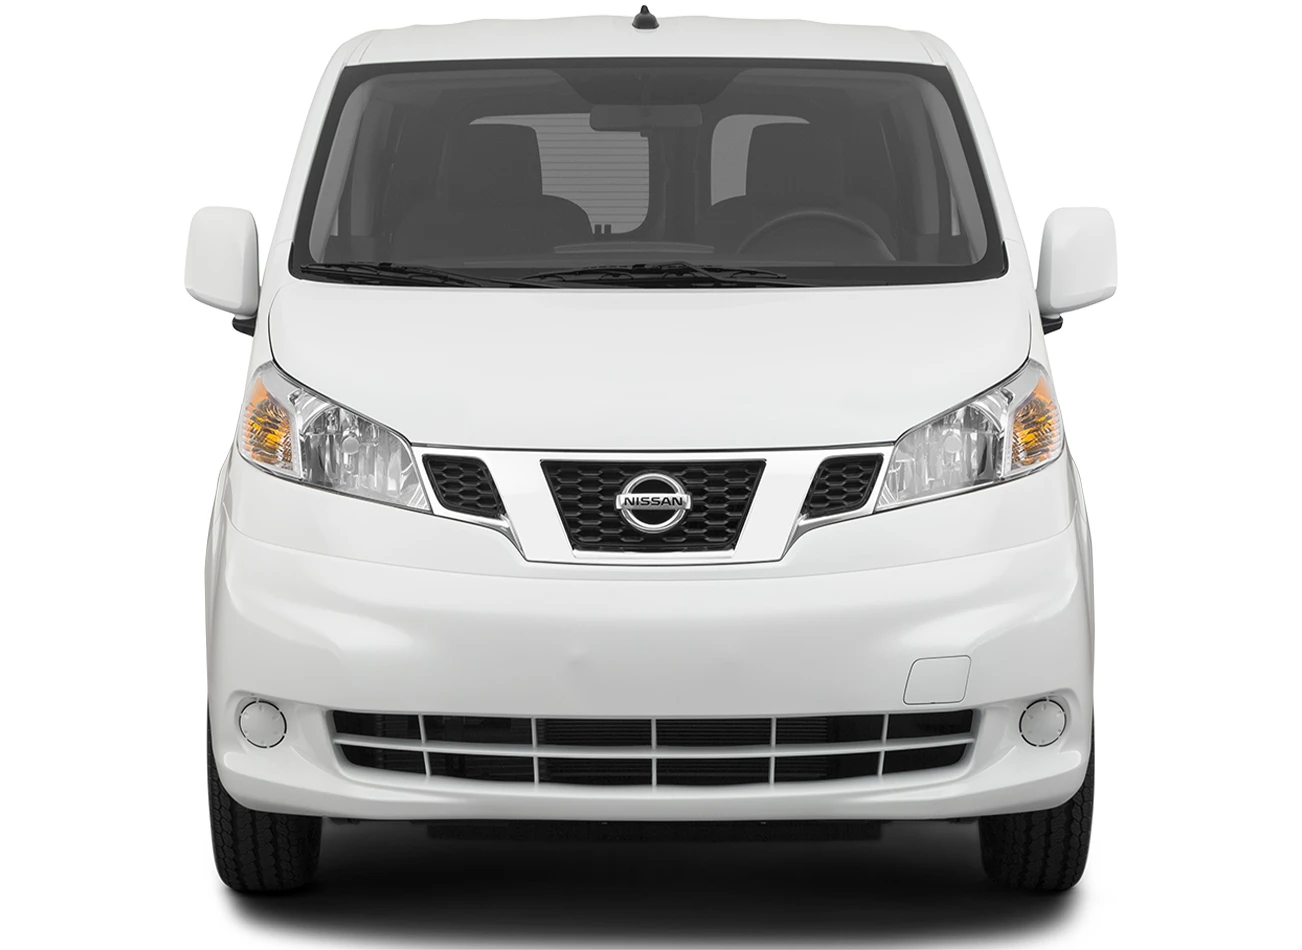 2020 Nissan NV200 Review: Front exterior view | CarMax